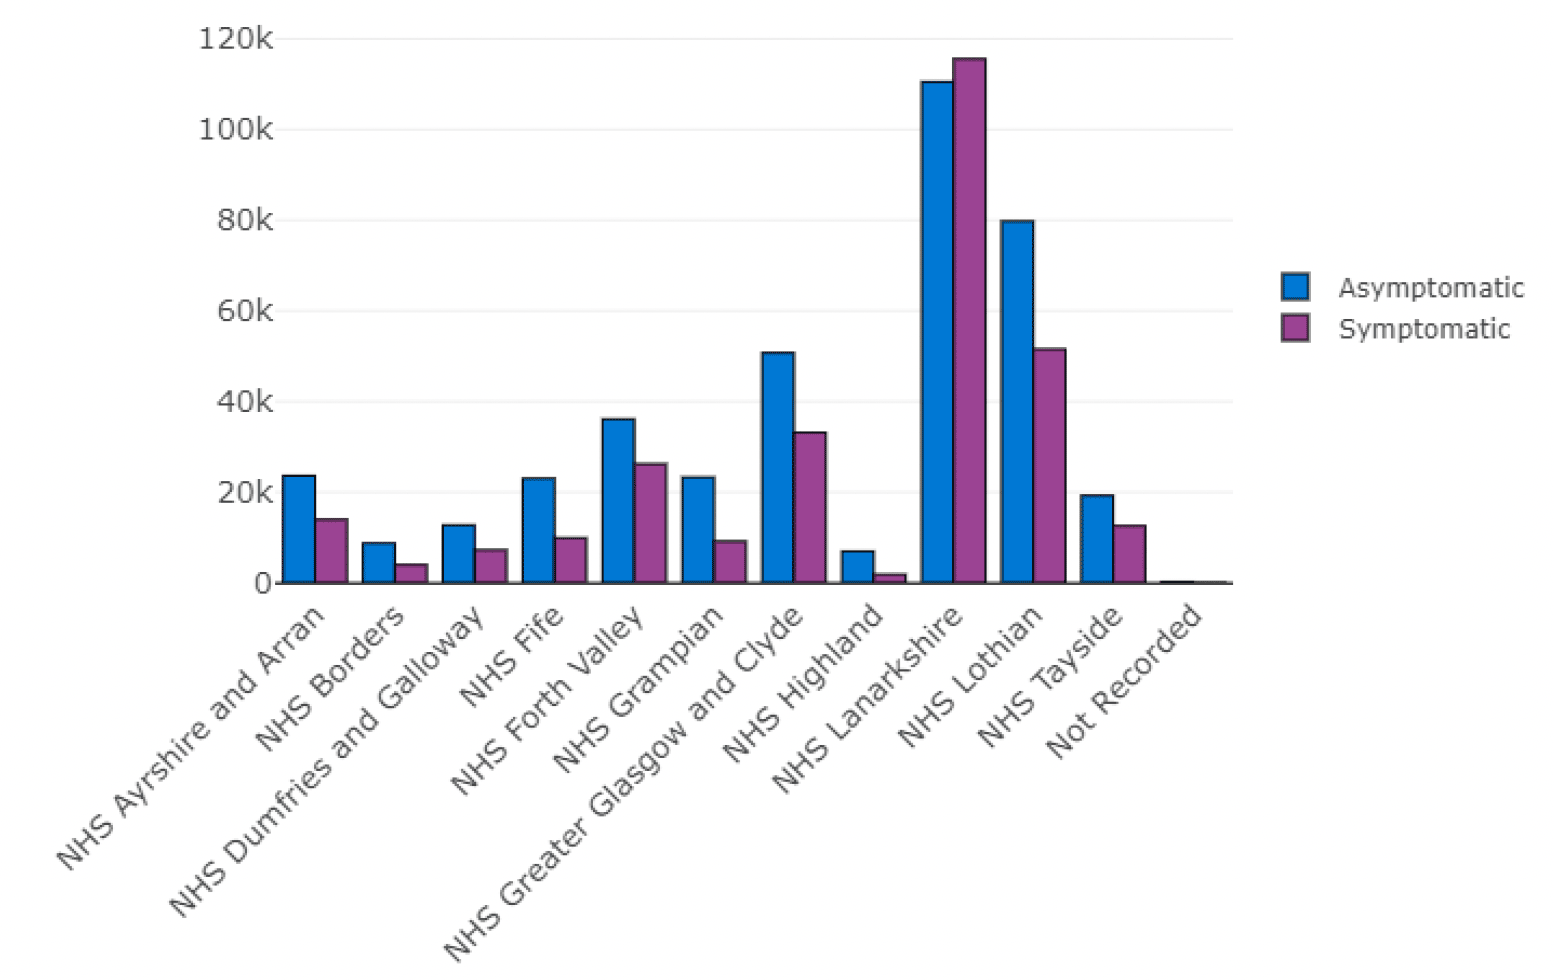 Figure 2 shows the cumulative total number of targeted community testing tests conducted within each Health Board between 18th January and 26th September 2021 by whether they were asymptomatic or symptomatic tests. The balance between symptomatic and asymptomatic testing varies between the boards, but for every health board except Lanarkshire, it shows that proportionately more asymptomatic testing was carried out than symptomatic testing. In Lanarkshire, slightly more symptomatic testing overall has been carried out over this time period. 